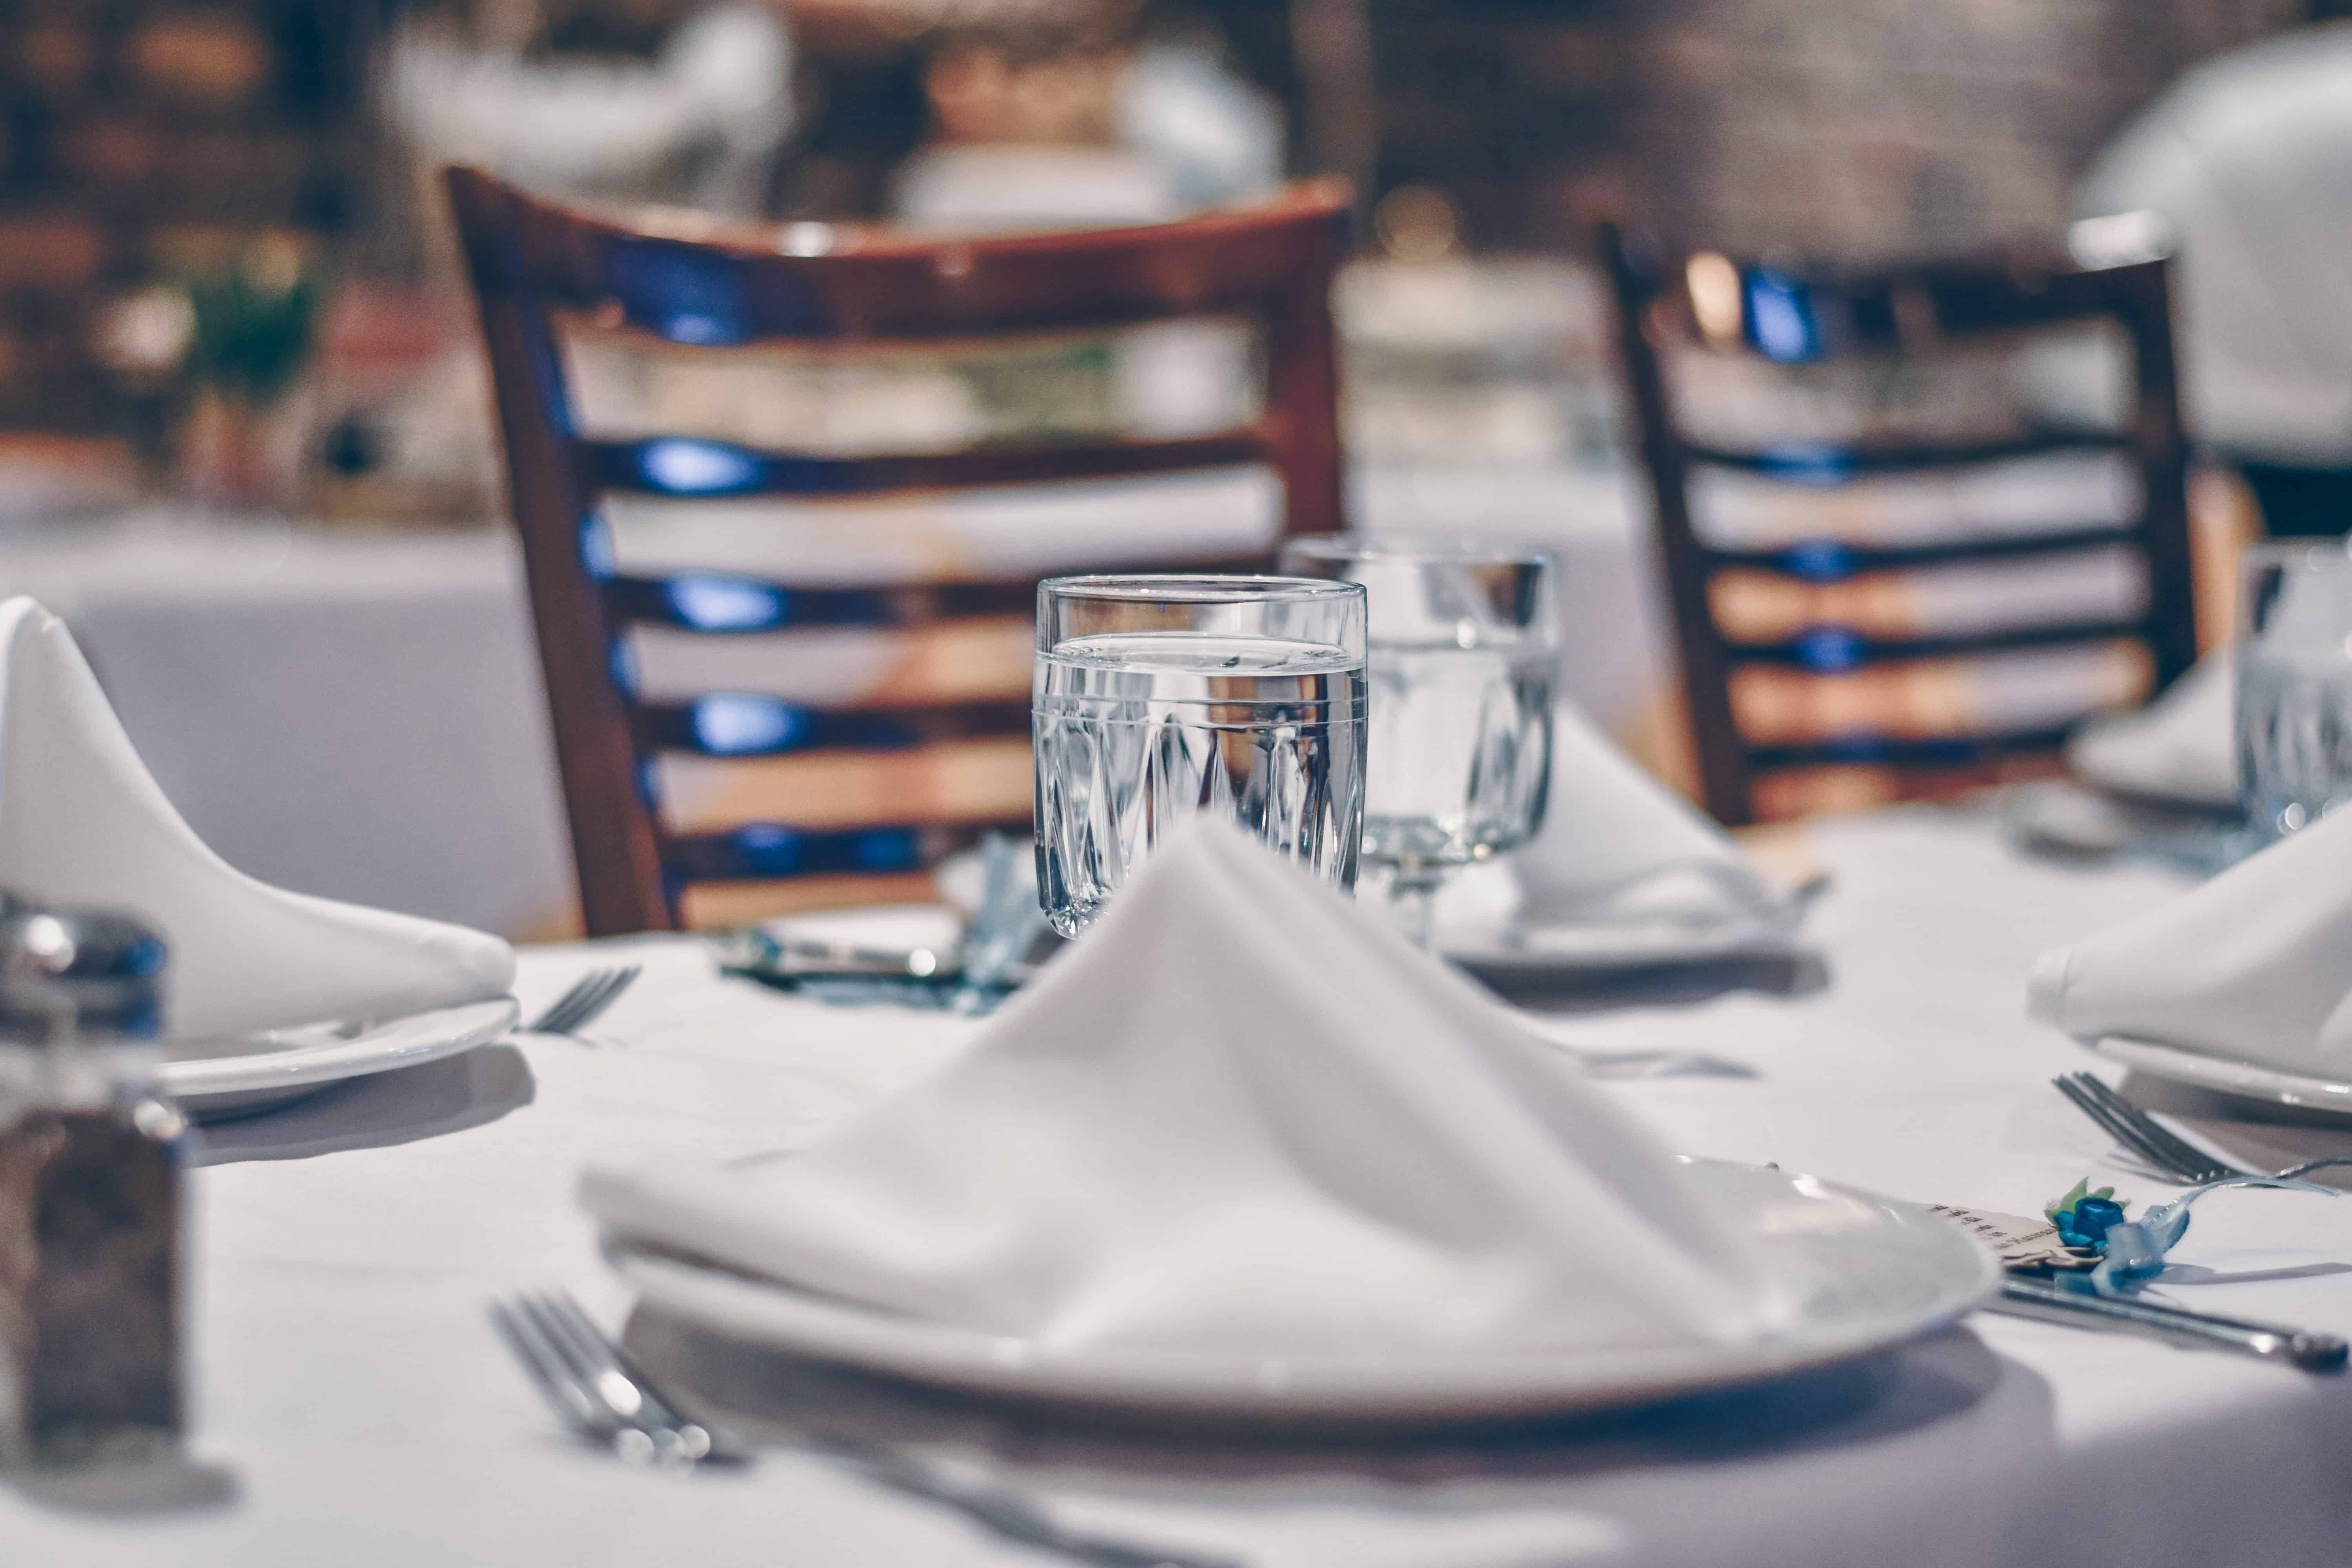 Six Advantages of Renting Linen for Businesses in The Hospitality Industry